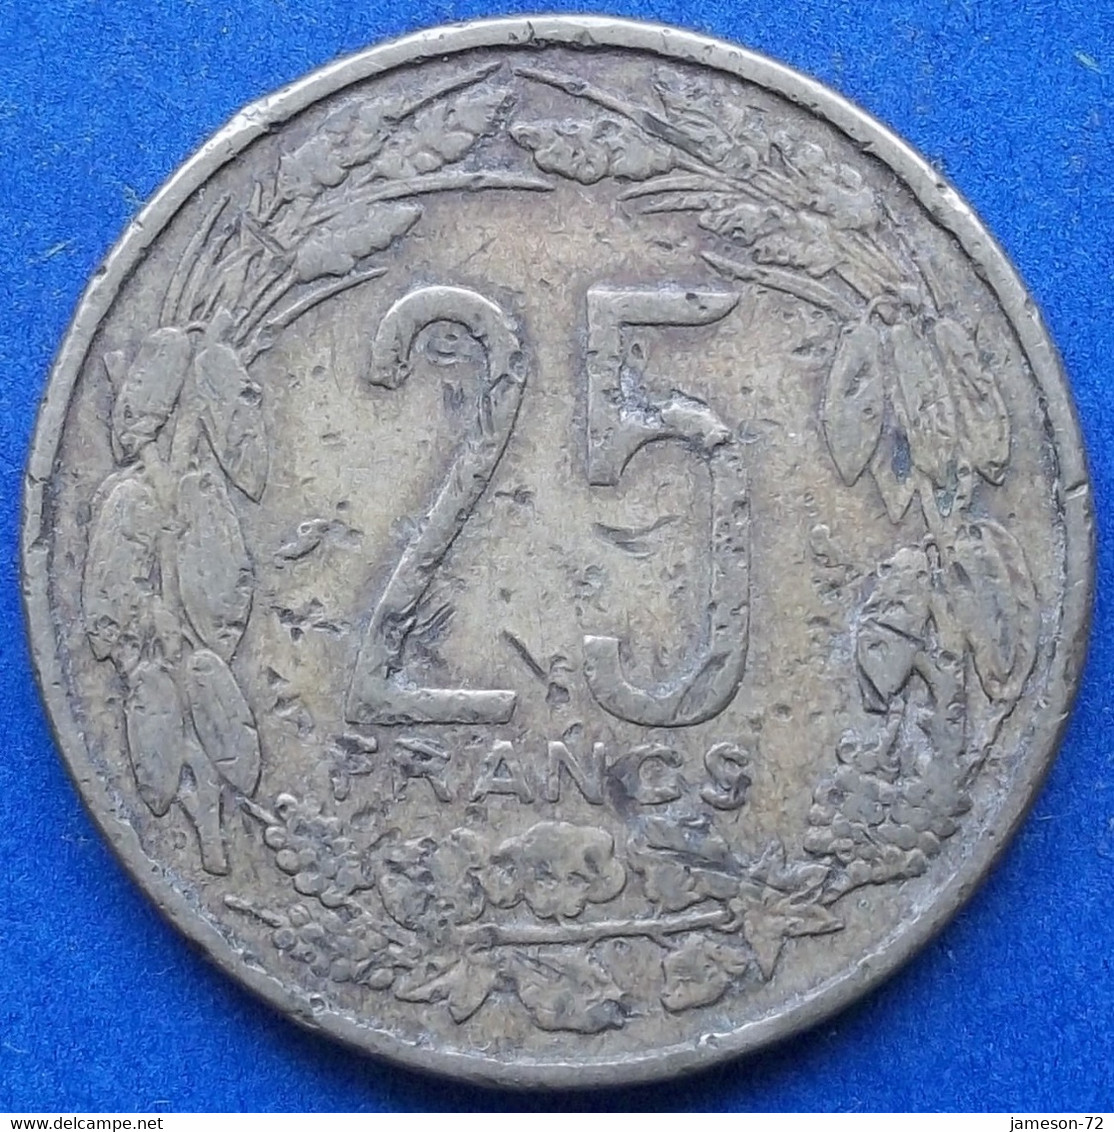 CAMEROON · EQUATORIAL AFRICAN STATES - 25 Francs 1972 KM# 4a Independent Republic (1960) - Edelweiss Coins - Cameroon